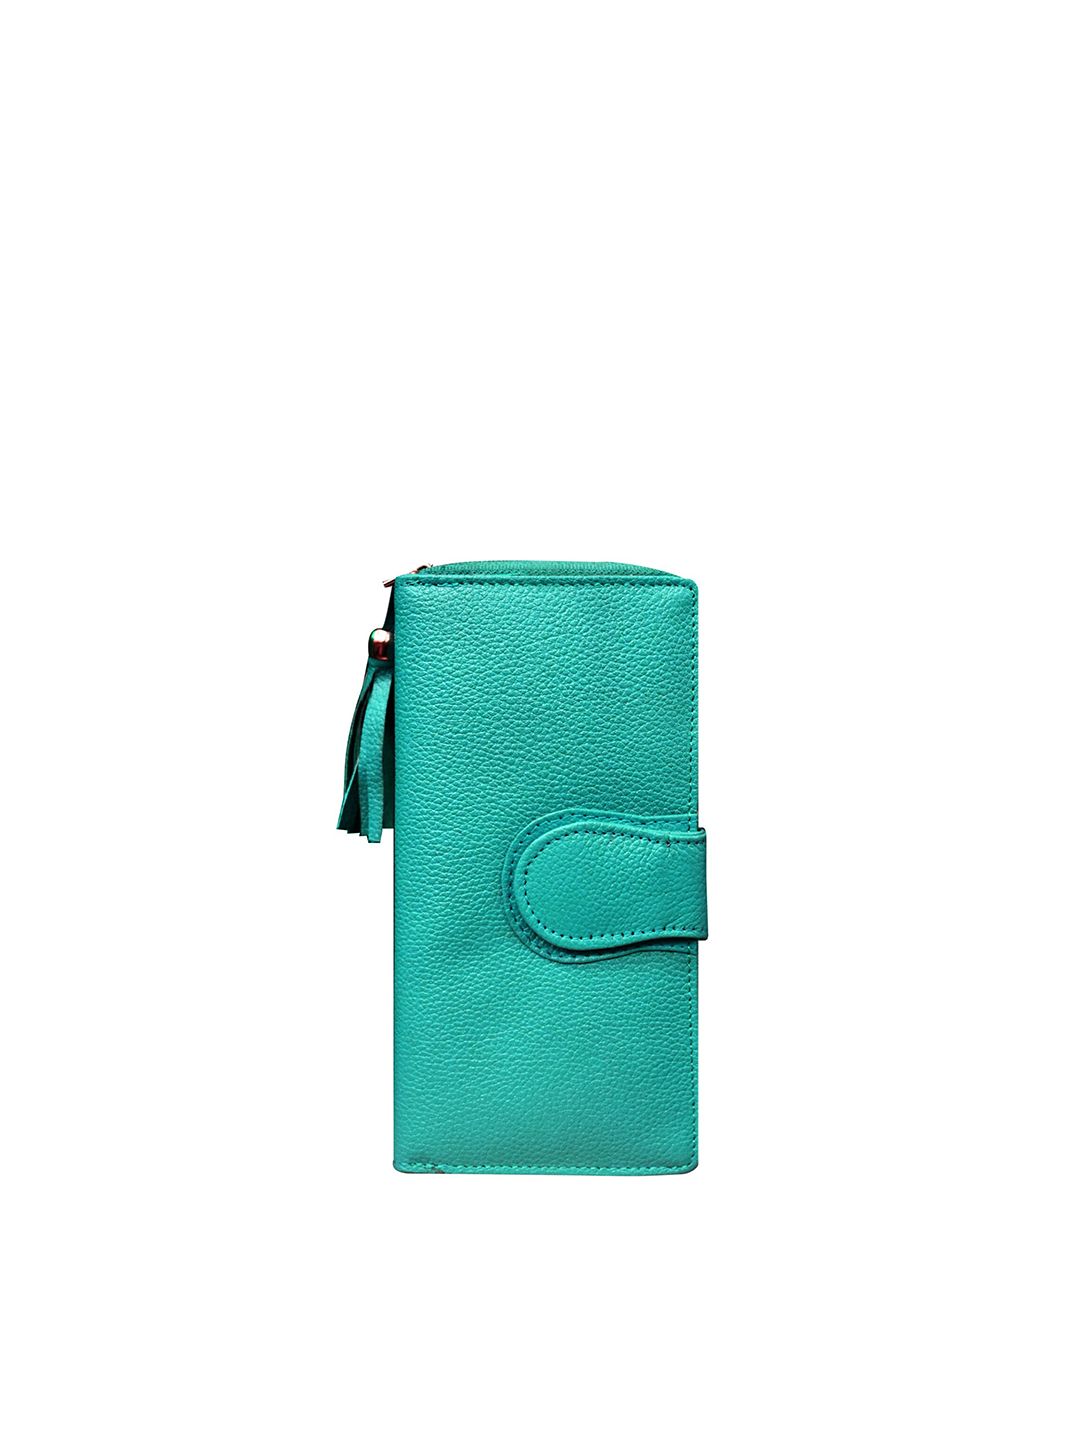 ABYS Women Teal Leather Two Fold Wallet Price in India